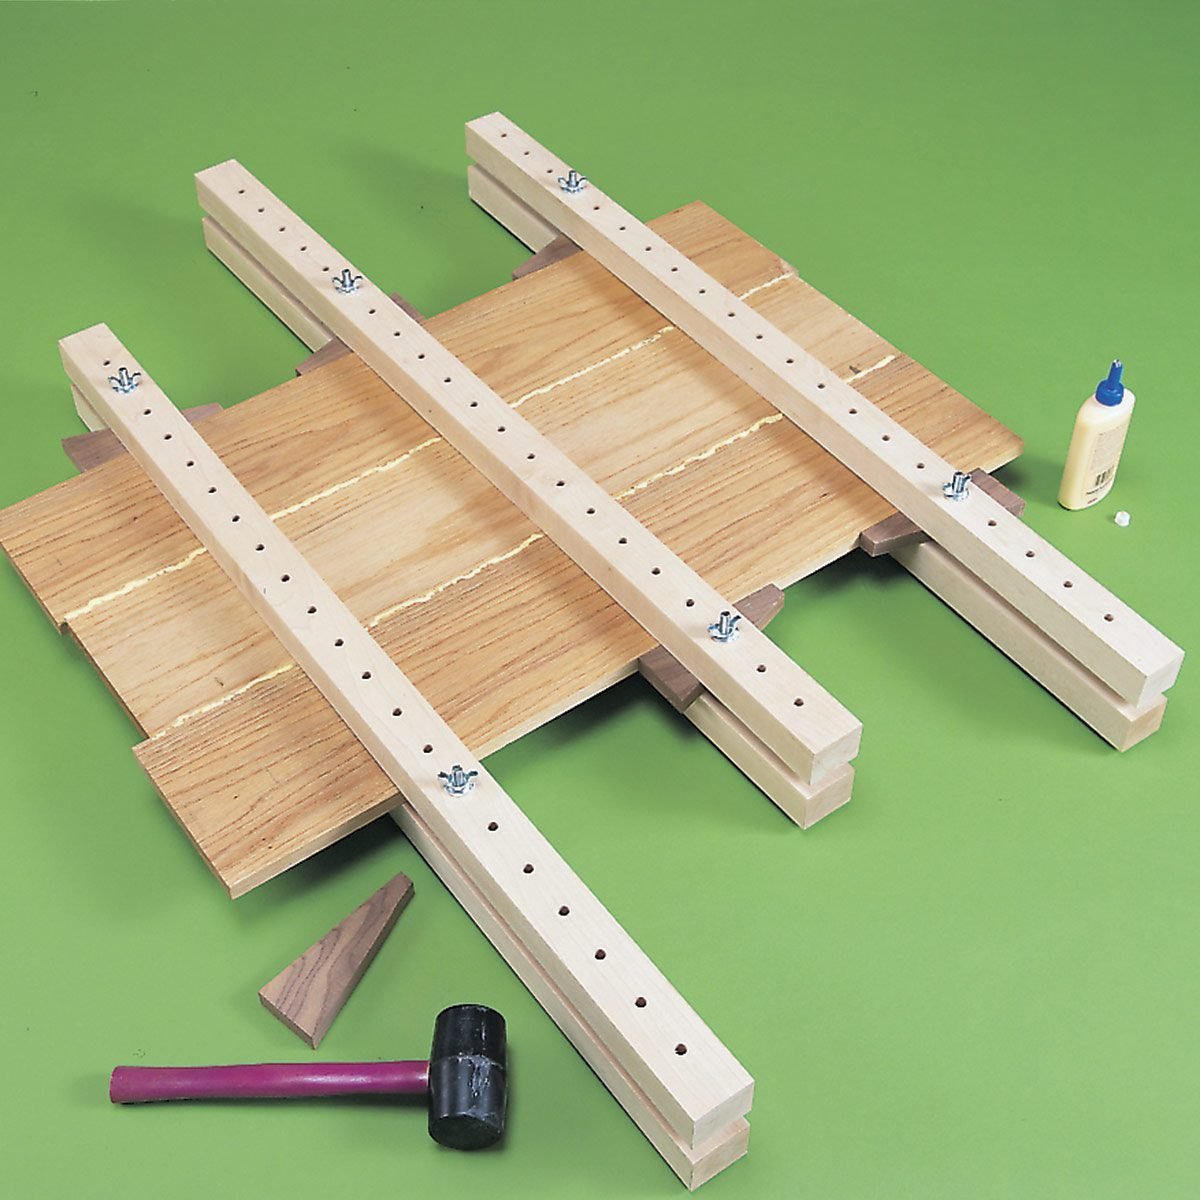 Shop-Made Edge-Gluing Clamps